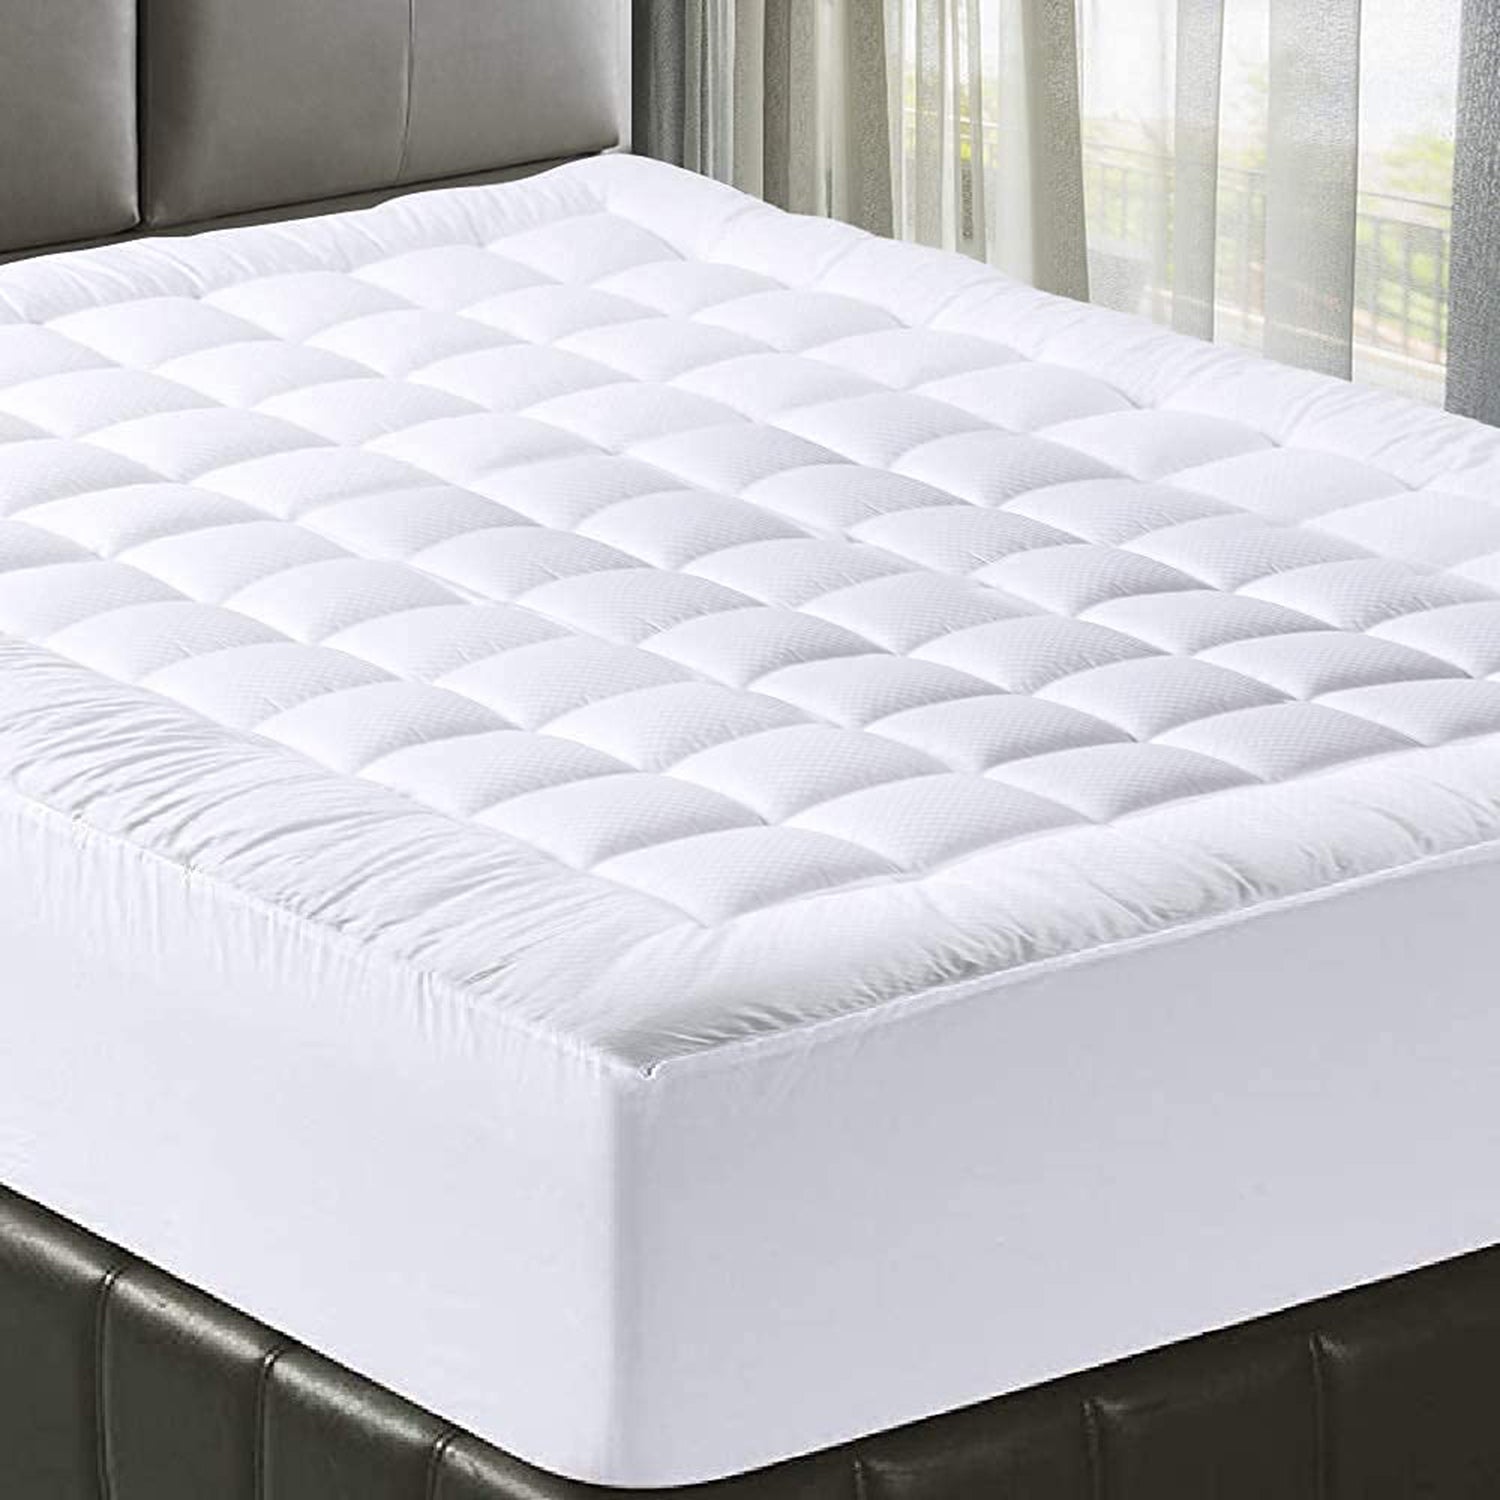 MATBEBY Quilted Fitted Mattress Pad